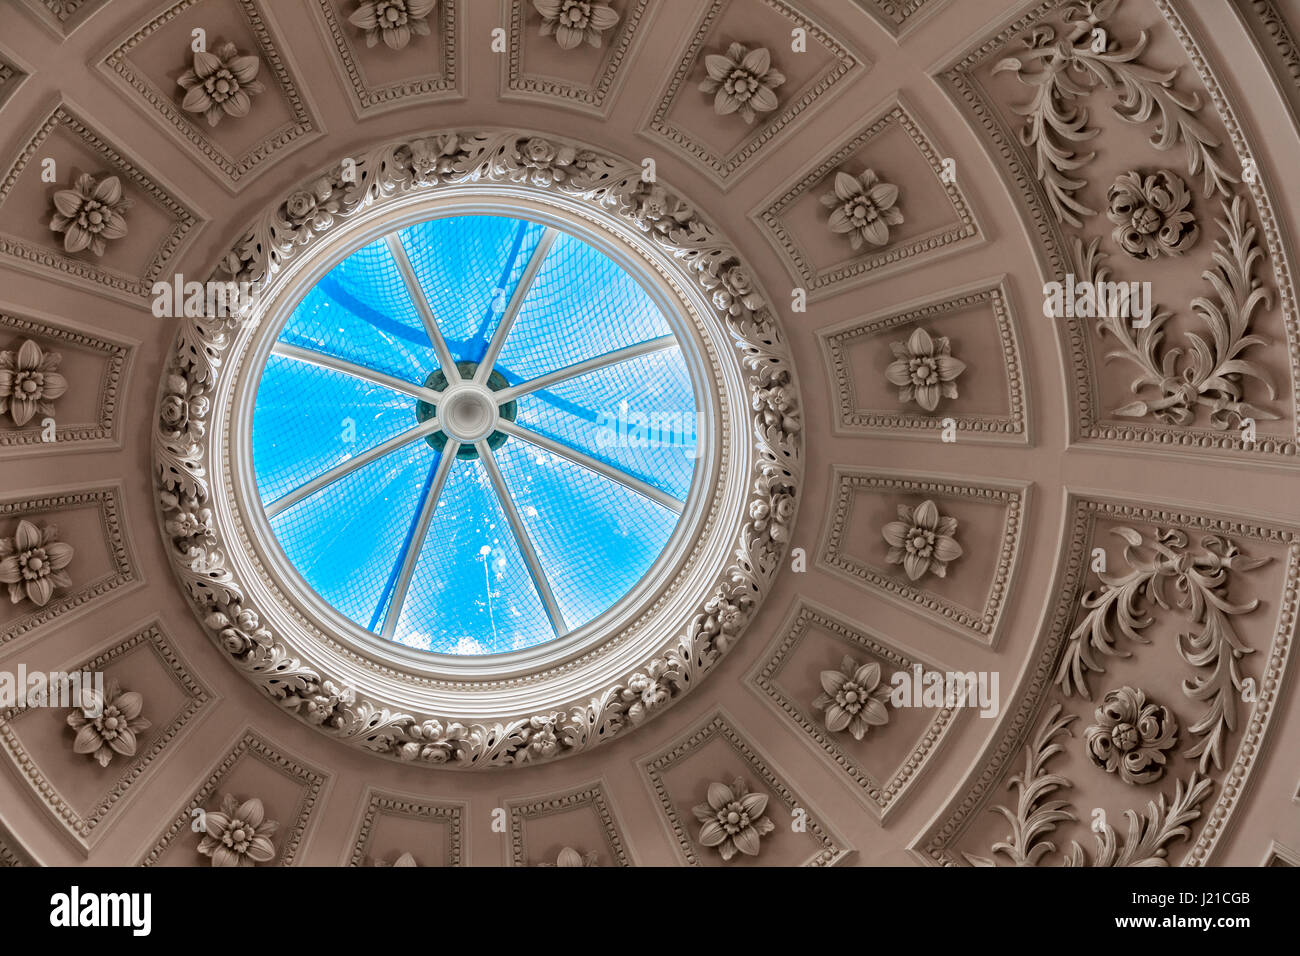 detail of an elaborate dome and window in England, UK Stock Photo